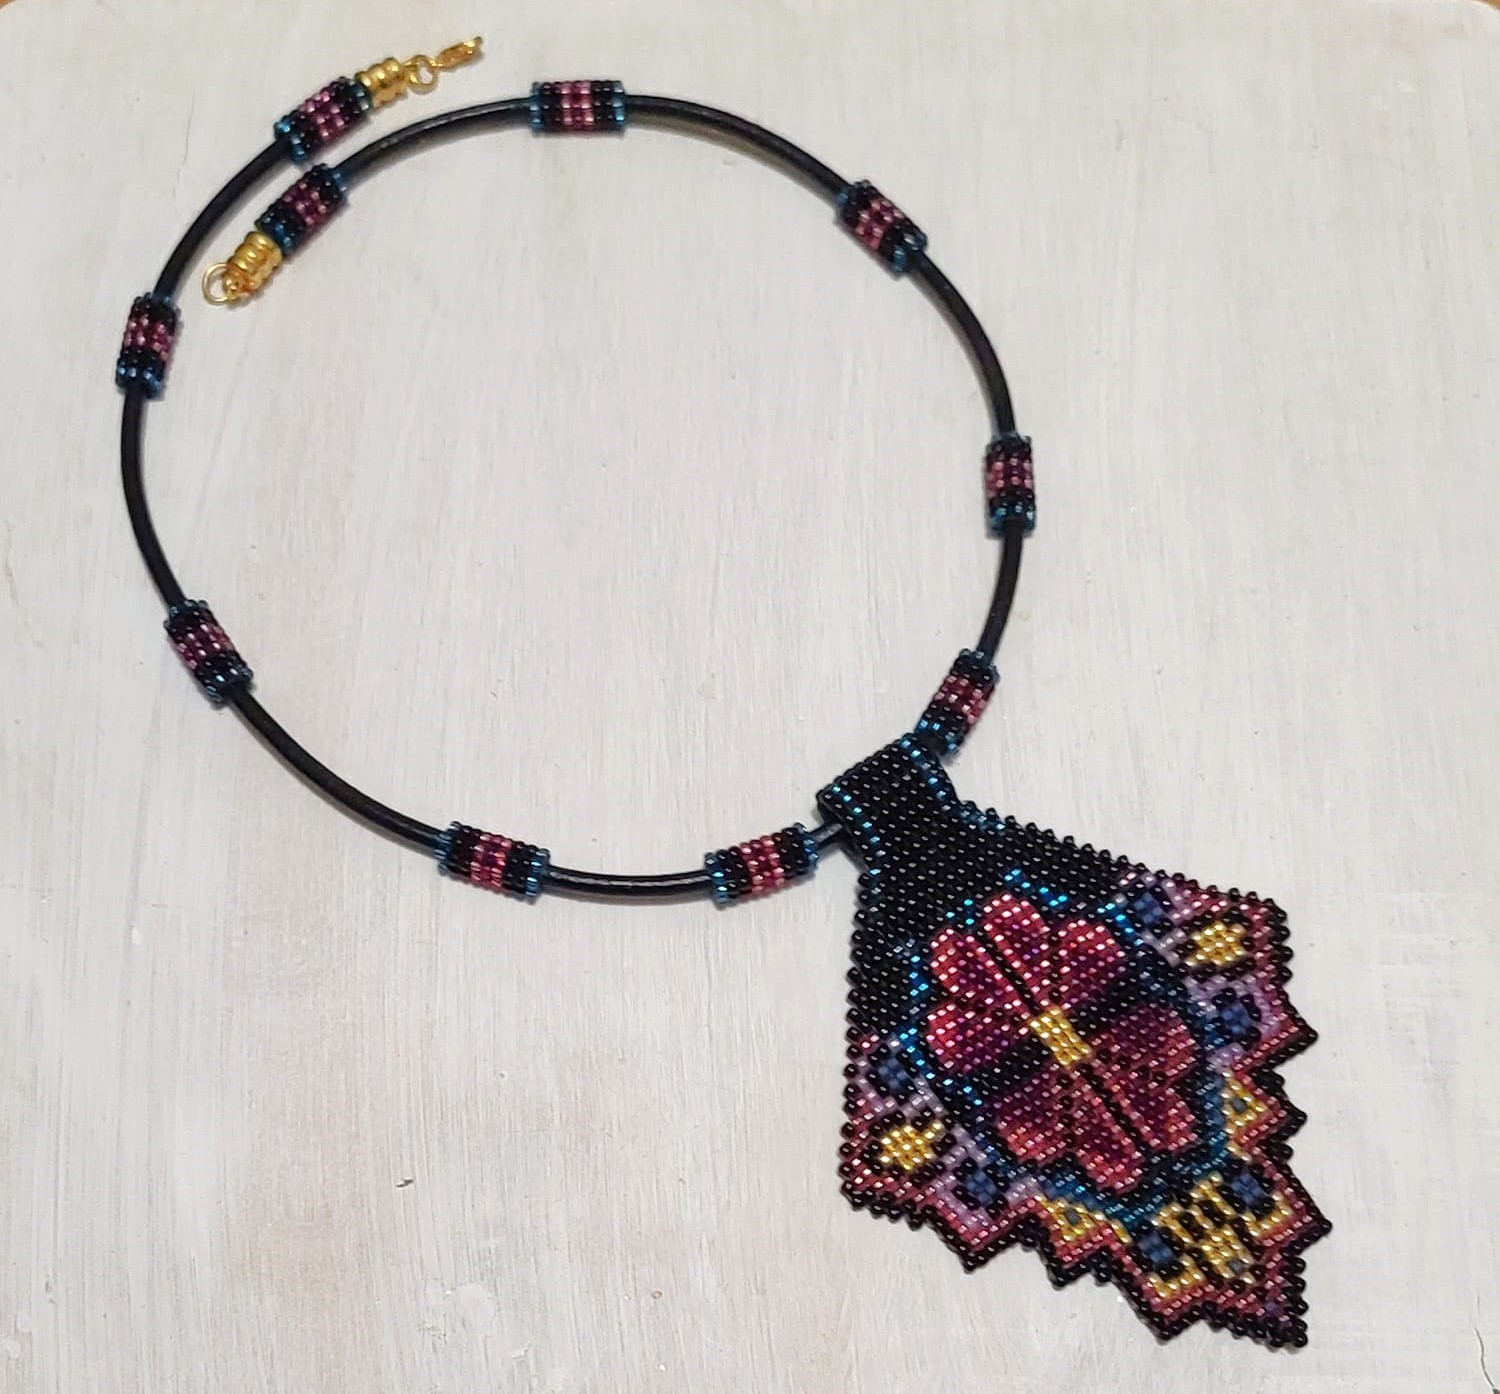 Geometric Floral Pattern Bead Weaved Necklace with Black leather